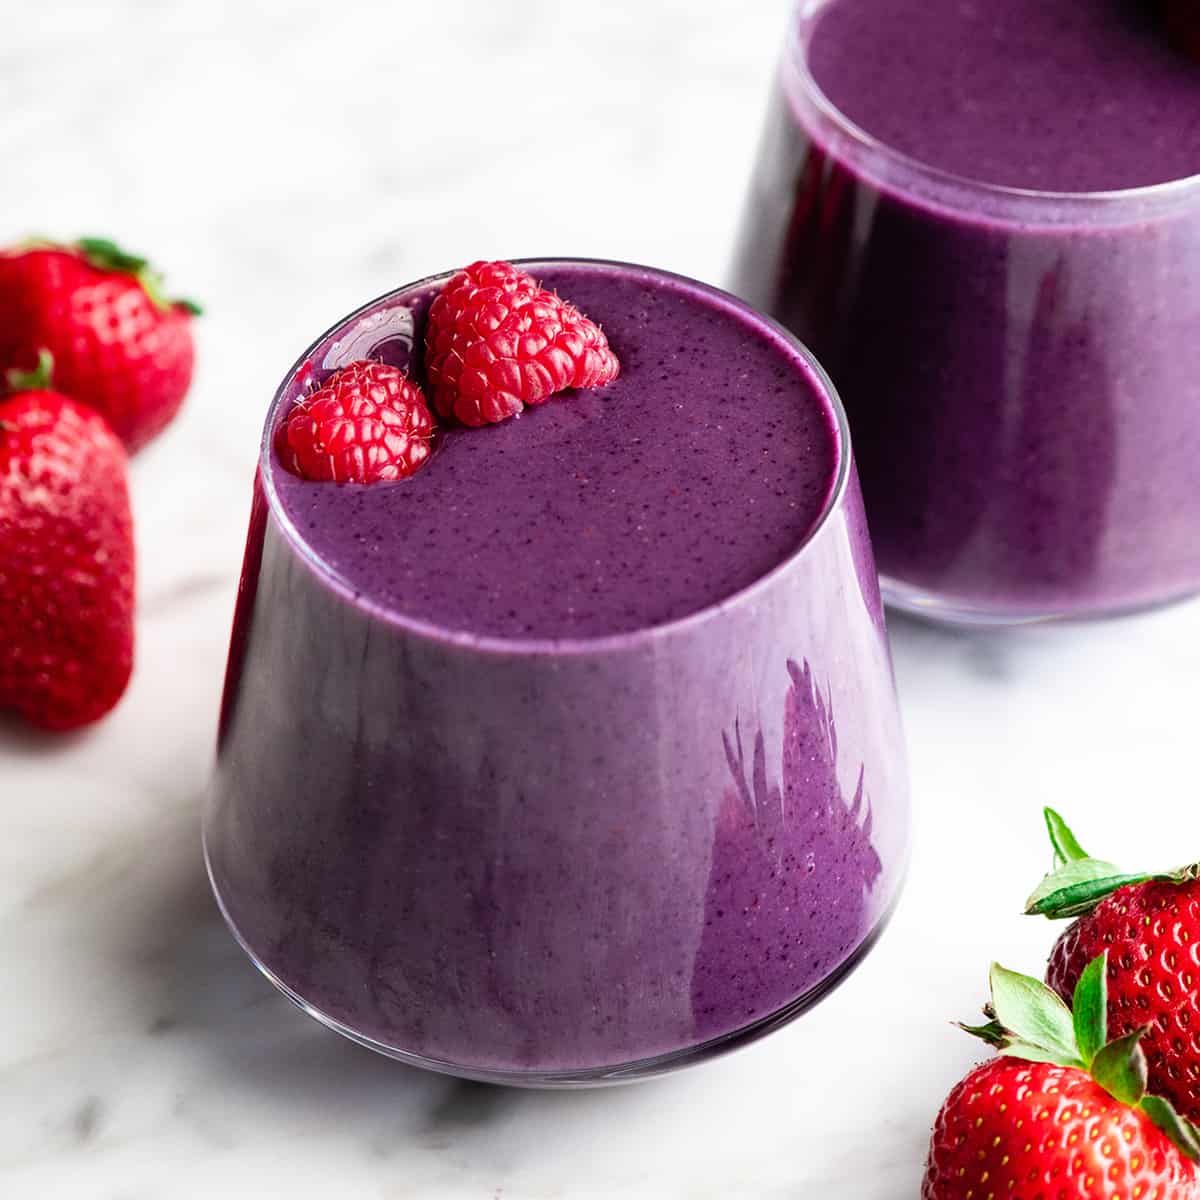 Frozen Mixed Fruit Smoothie - a healthy way to start the day!